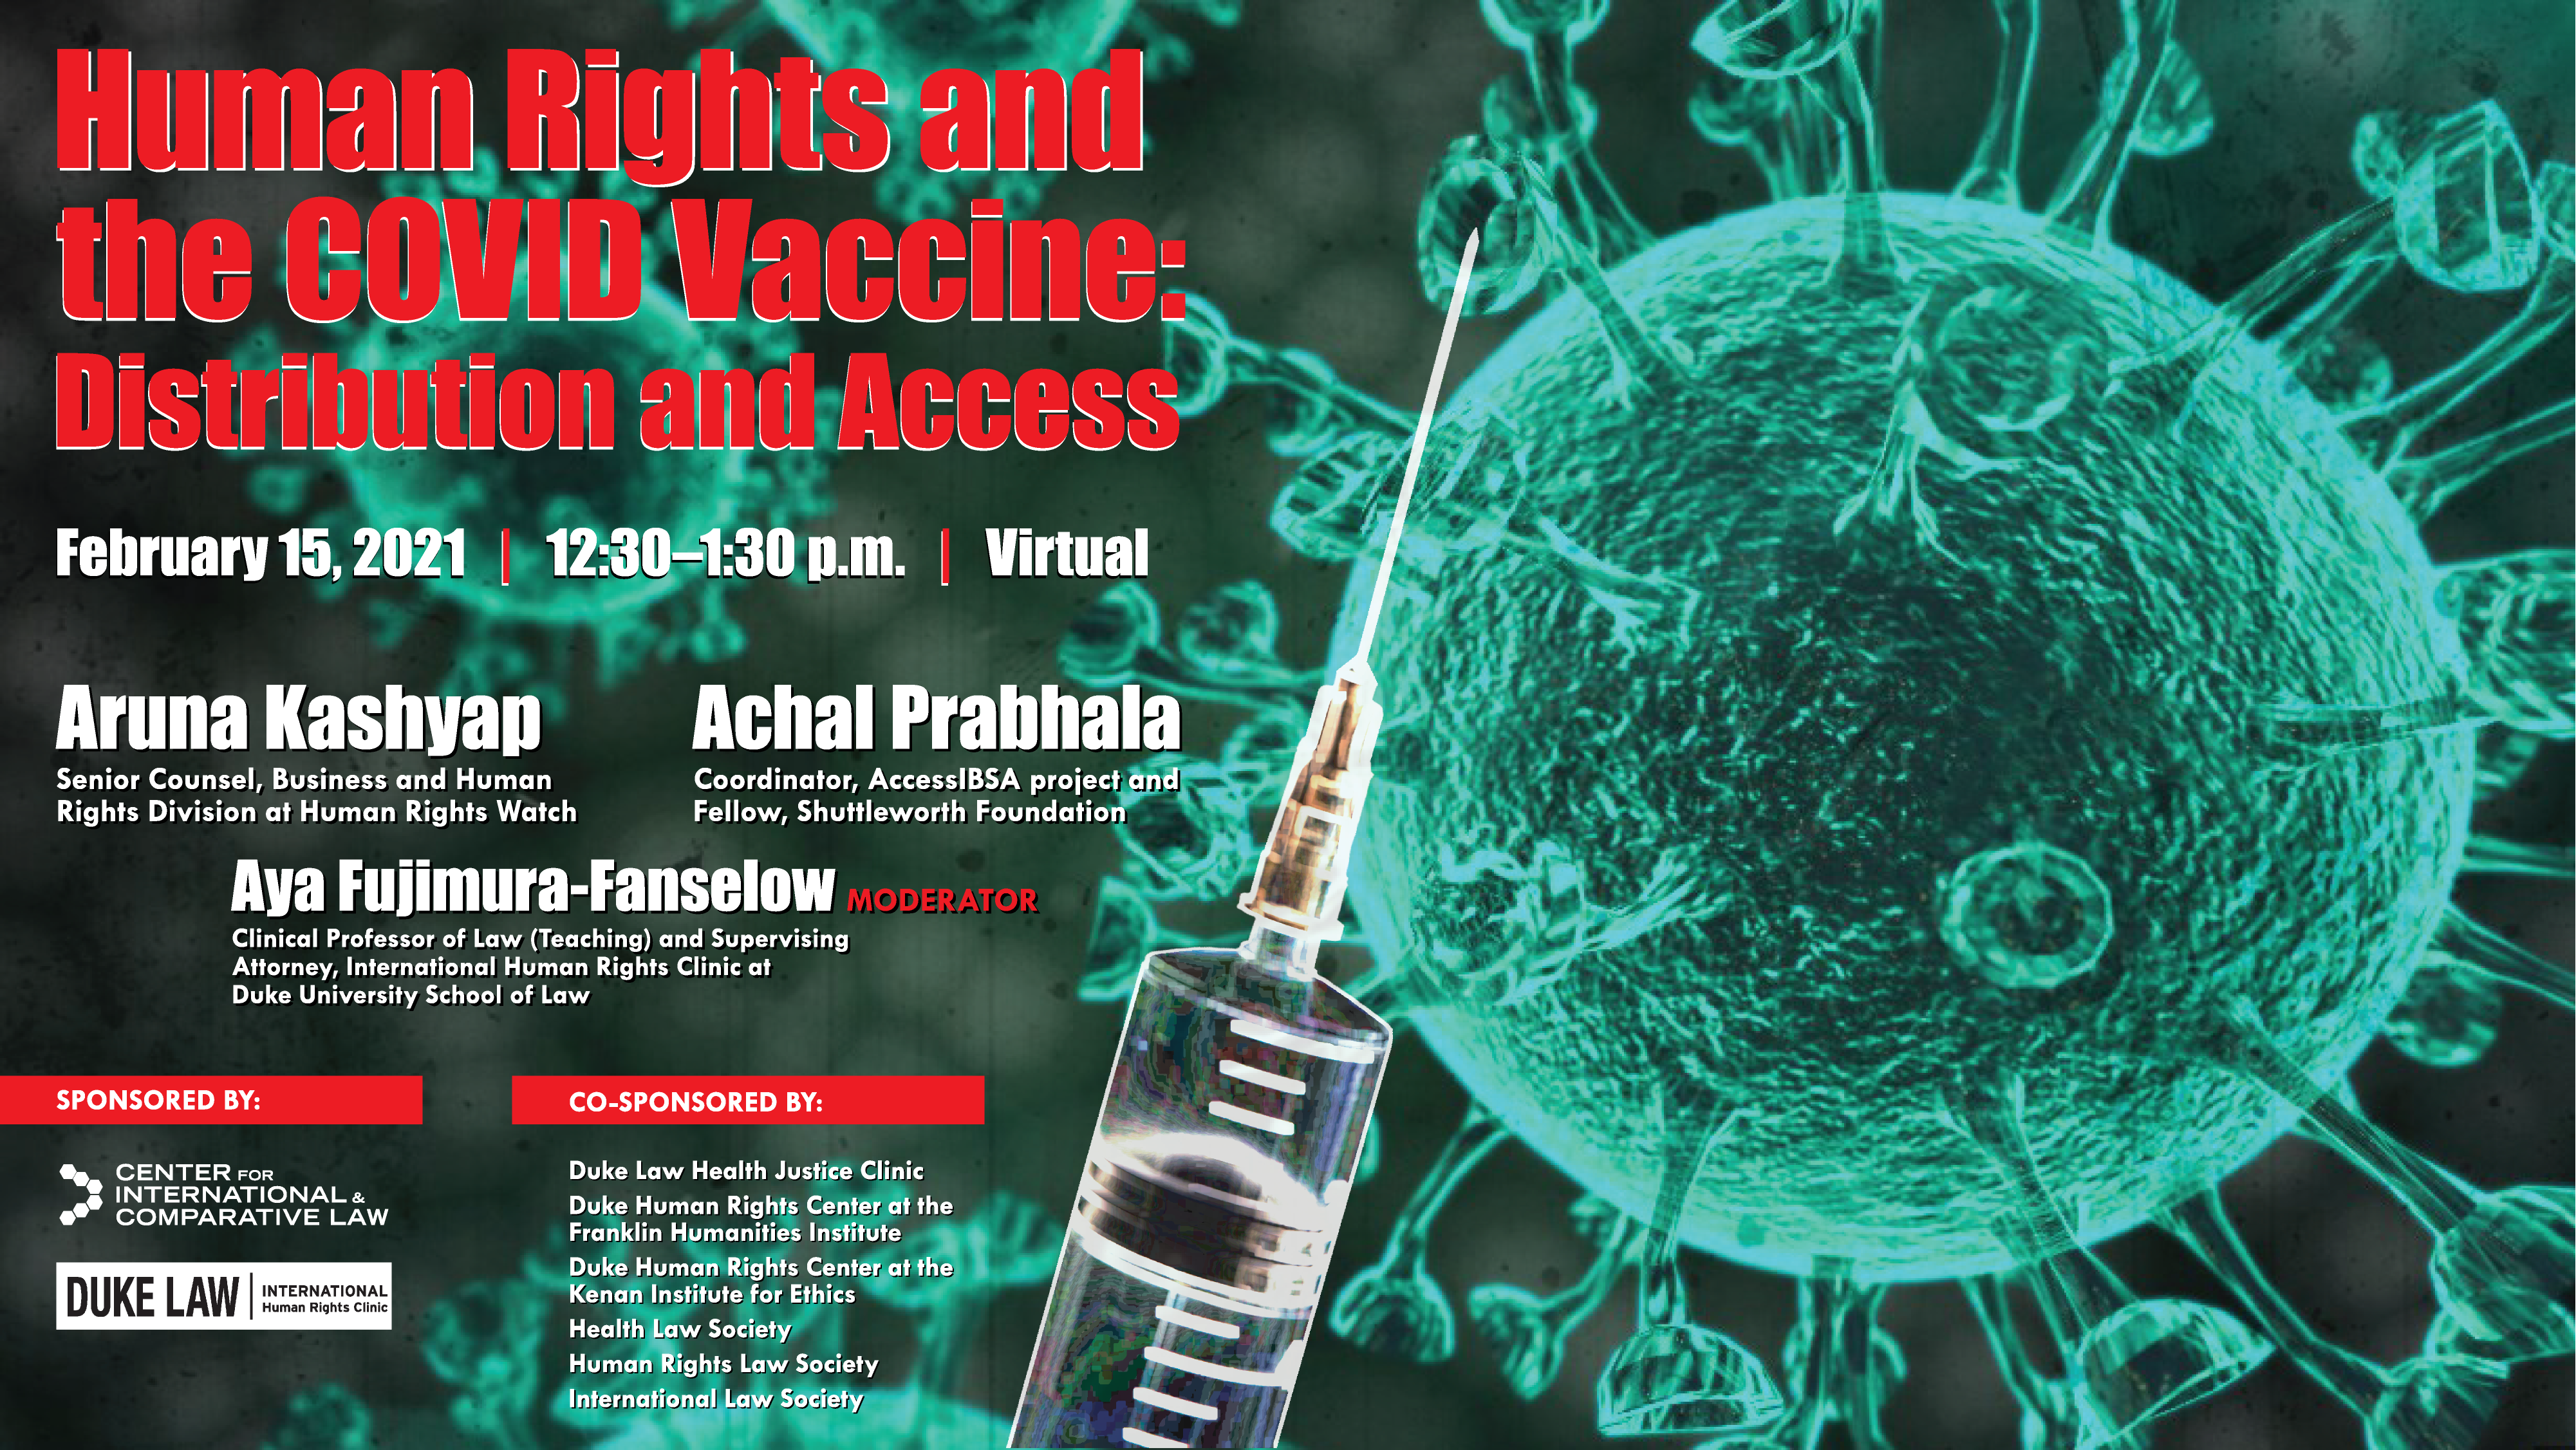 Human Rights in Practice -- Human Rights and the COVID Vaccine: Distribution and Access; Monday, February 15, 2021; 12:30-1:30 p.m.; Virtual